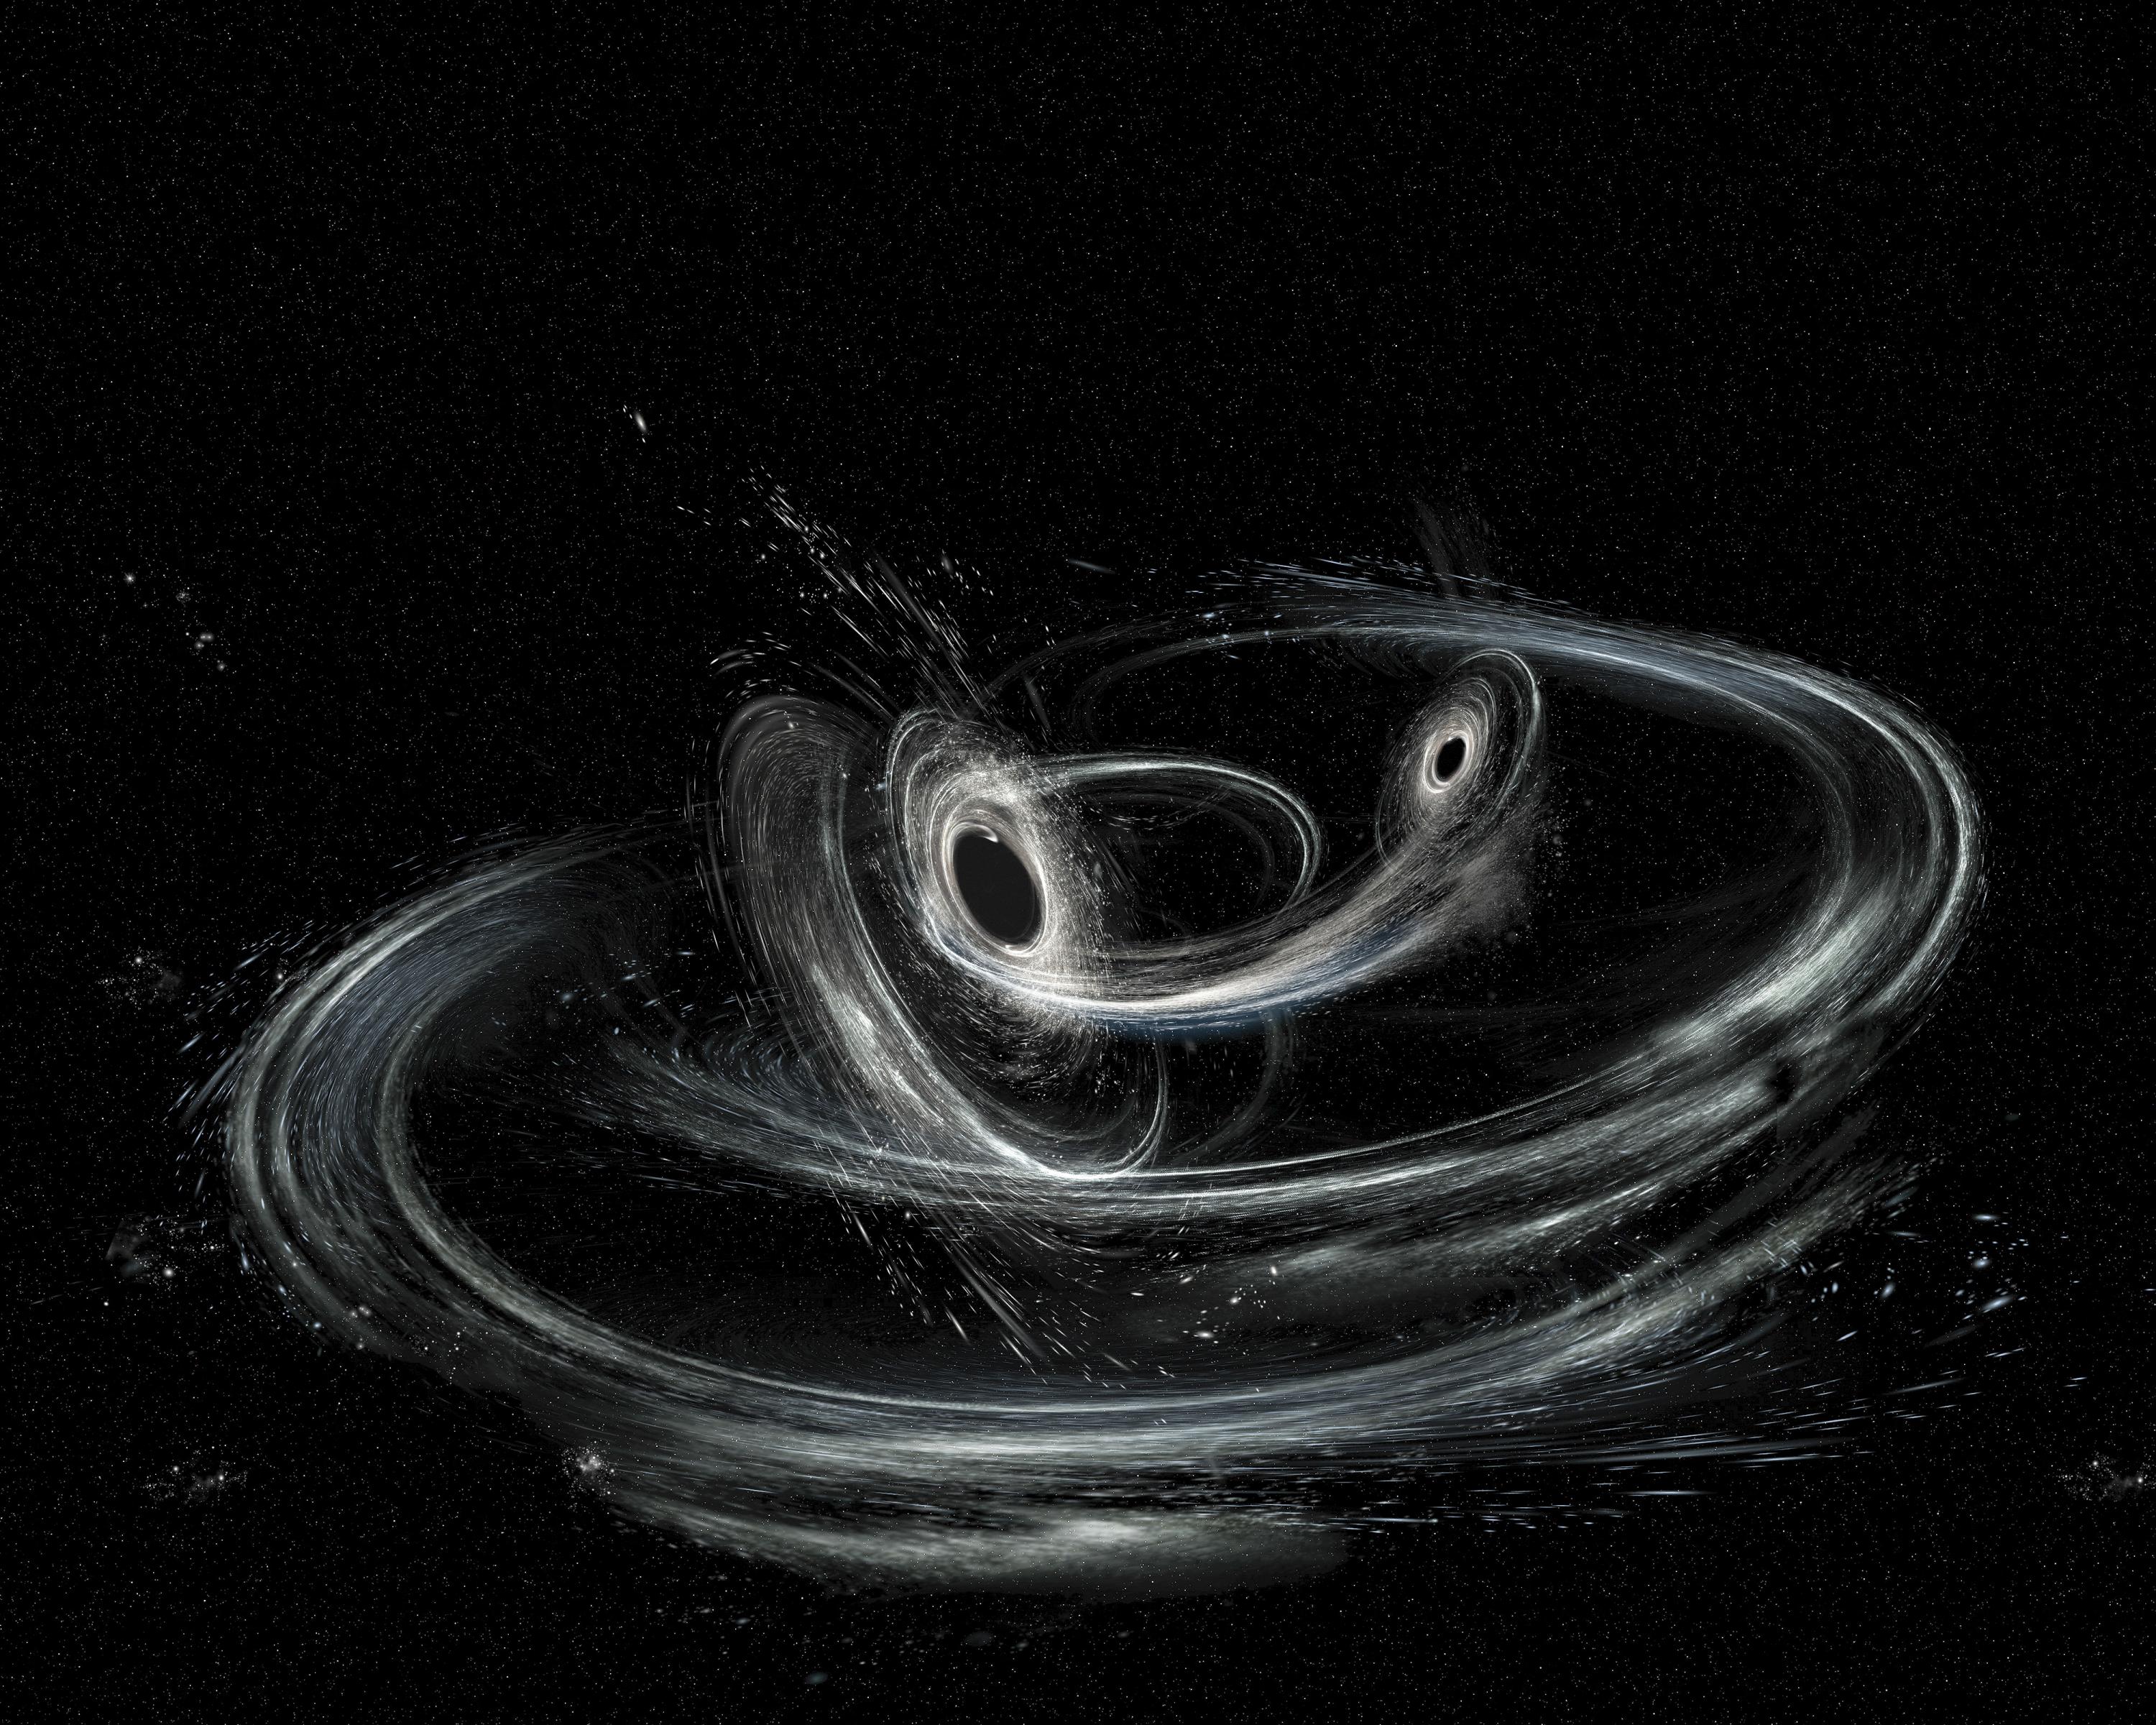 Artist's conception shows two merging black holes similar to those detected by LIGO. The black holes—which will ultimately spiral together into one larger black hole—are illustrated to be orbiting one another in a plane. The black holes are spinning in a non-aligned fashion, which means they have different orientations relative to the overall orbital motion of the pair. There is a hint of this phenomenon found by LIGO in at least one black hole of the GW170104 system. [Image credit: LIGO/Caltech/MIT/Son